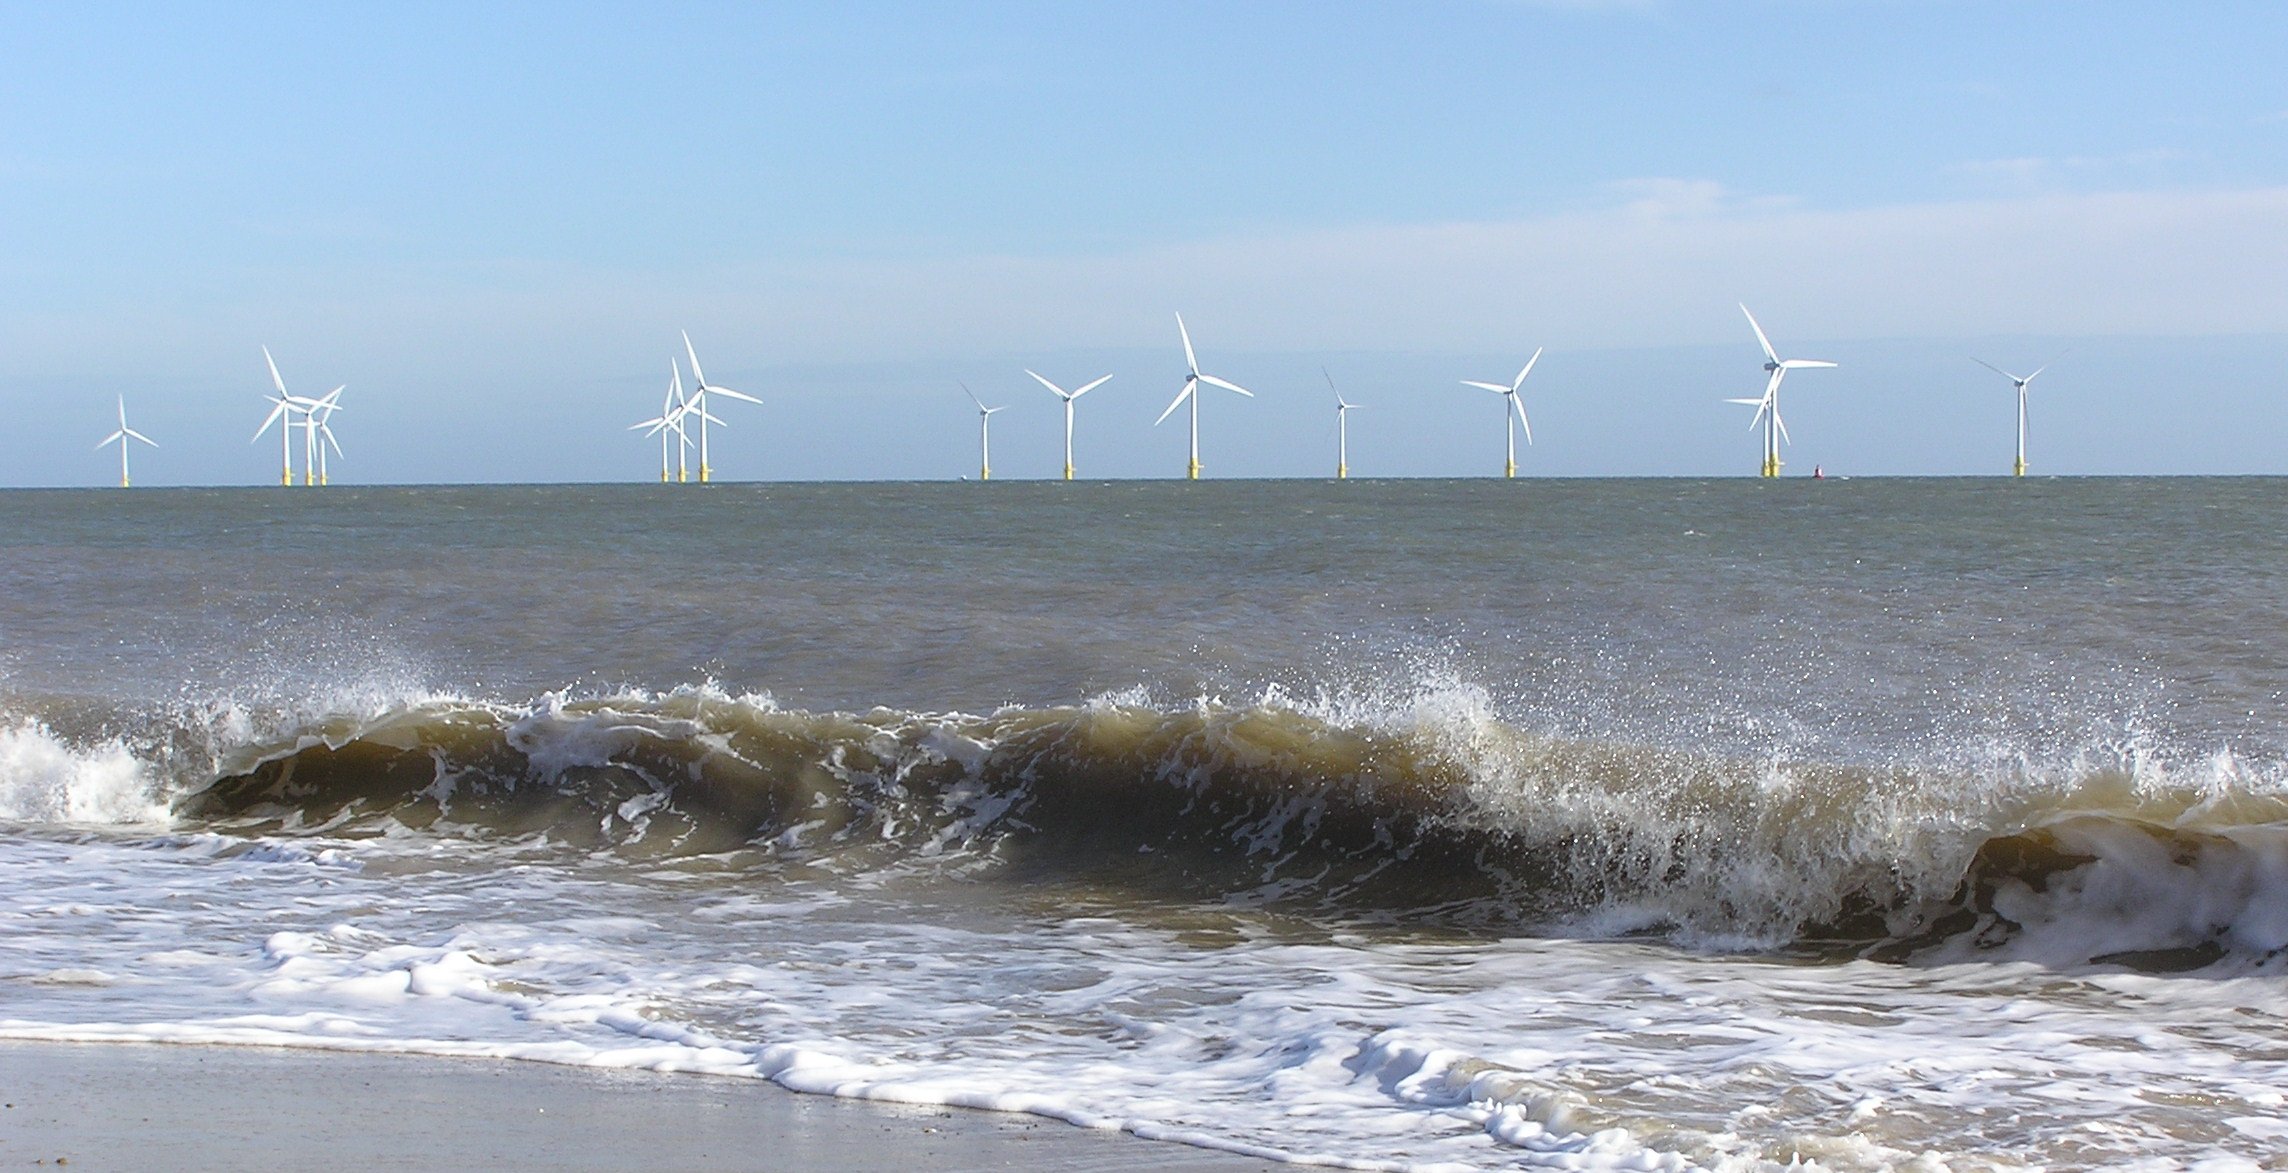 The Scroby Sands Wind Farm which produces, on average, less than 20MW of power. Source: Miss.hyper at the English language Wikipedia, CC-BY-SA-3.0, via Wikimedia Commons.